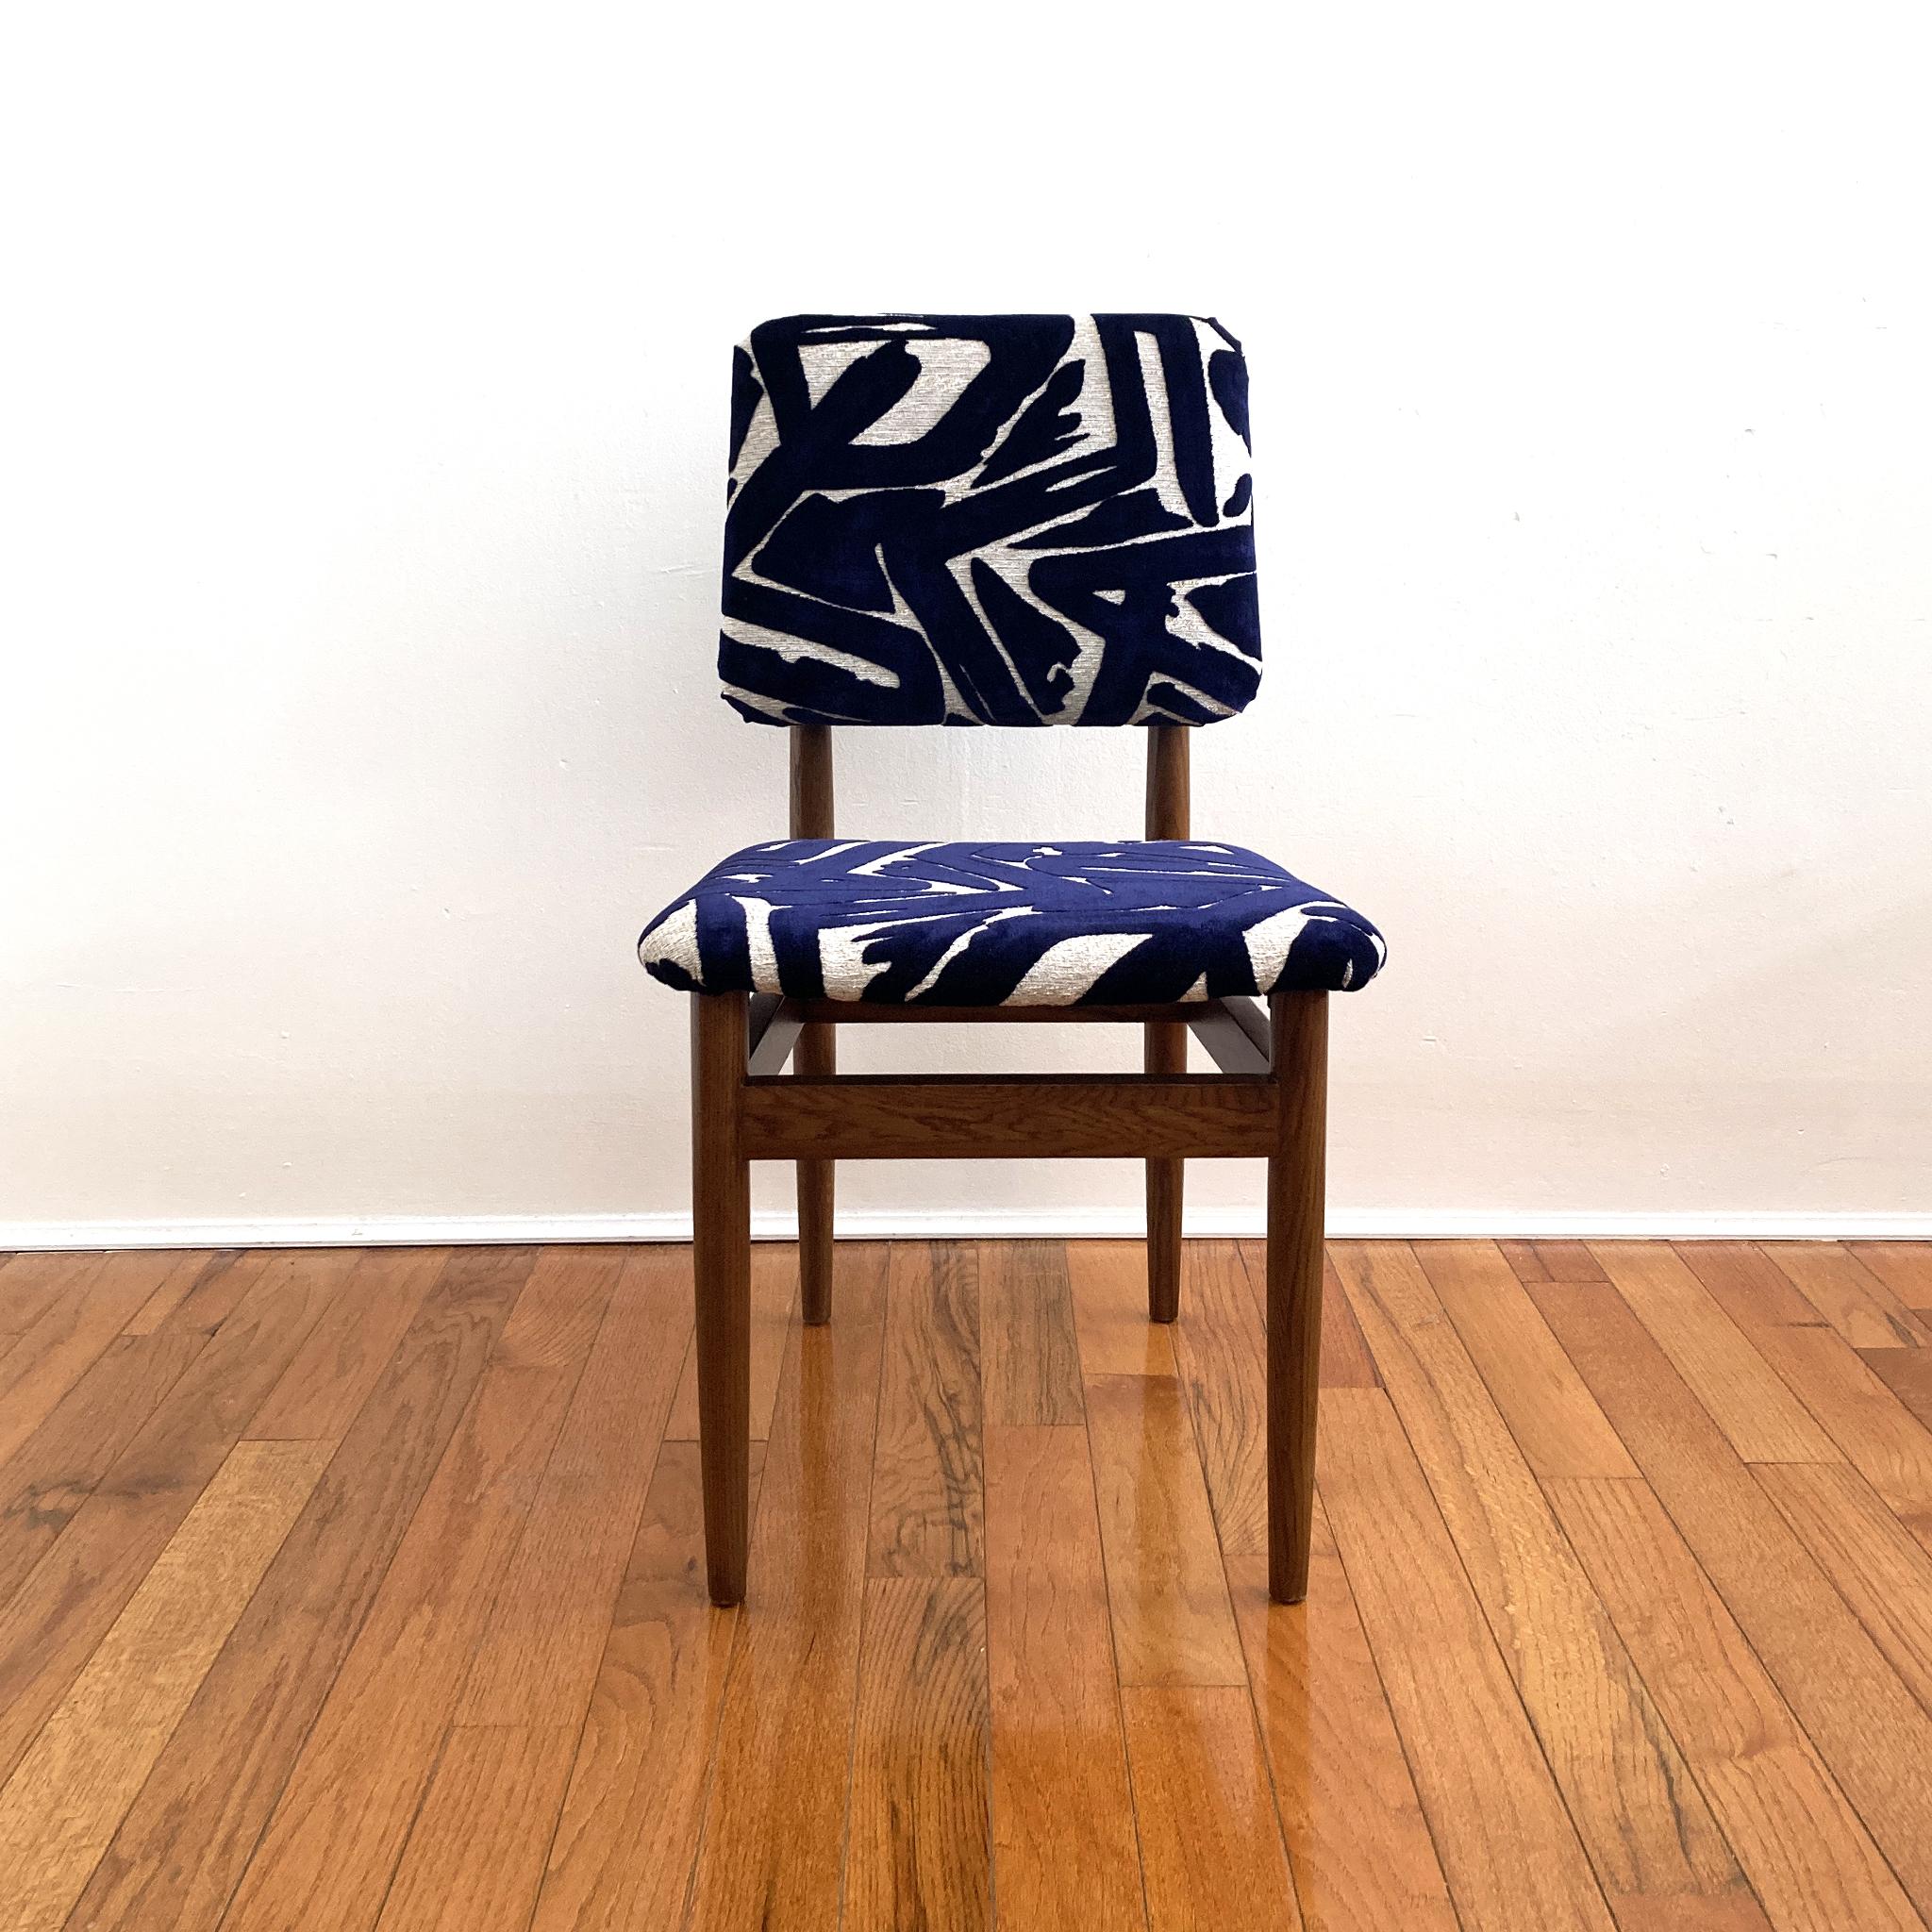 Arne Vodder Style Midcentury Chair Reupholstered in Abstract Blue and Ecru In Good Condition For Sale In New York, NY